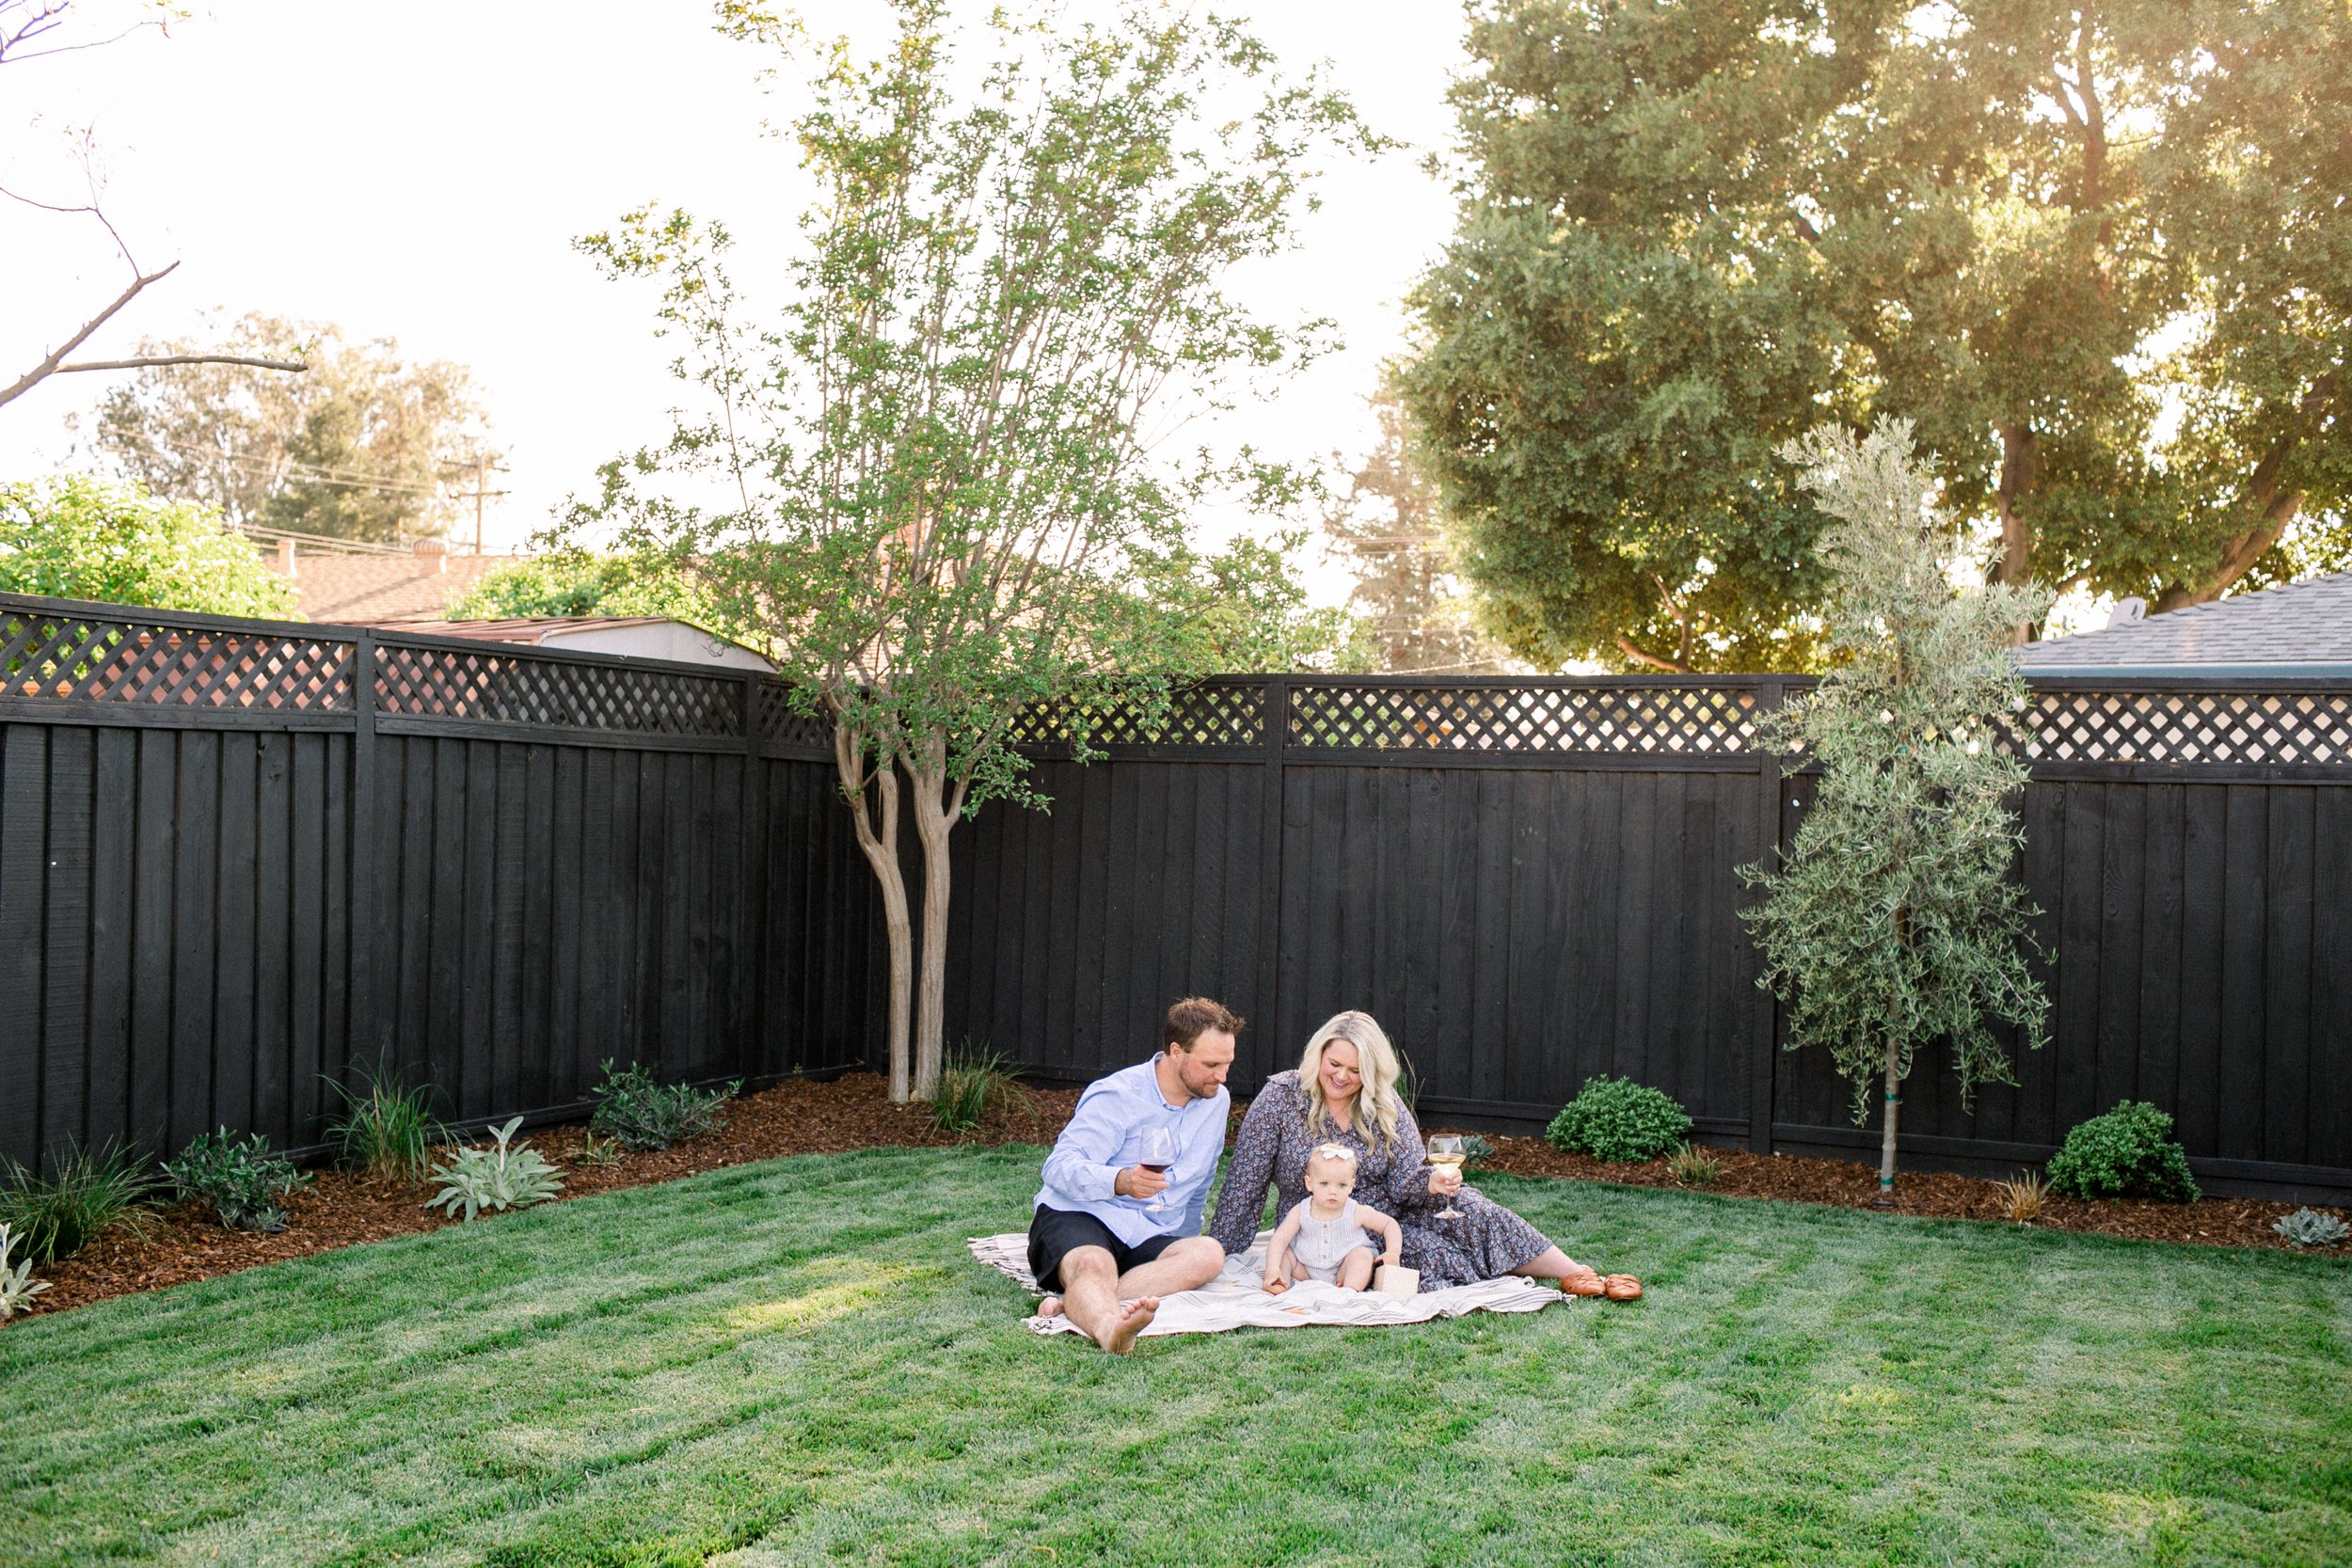 Family of three sitting on the lawn during picnic